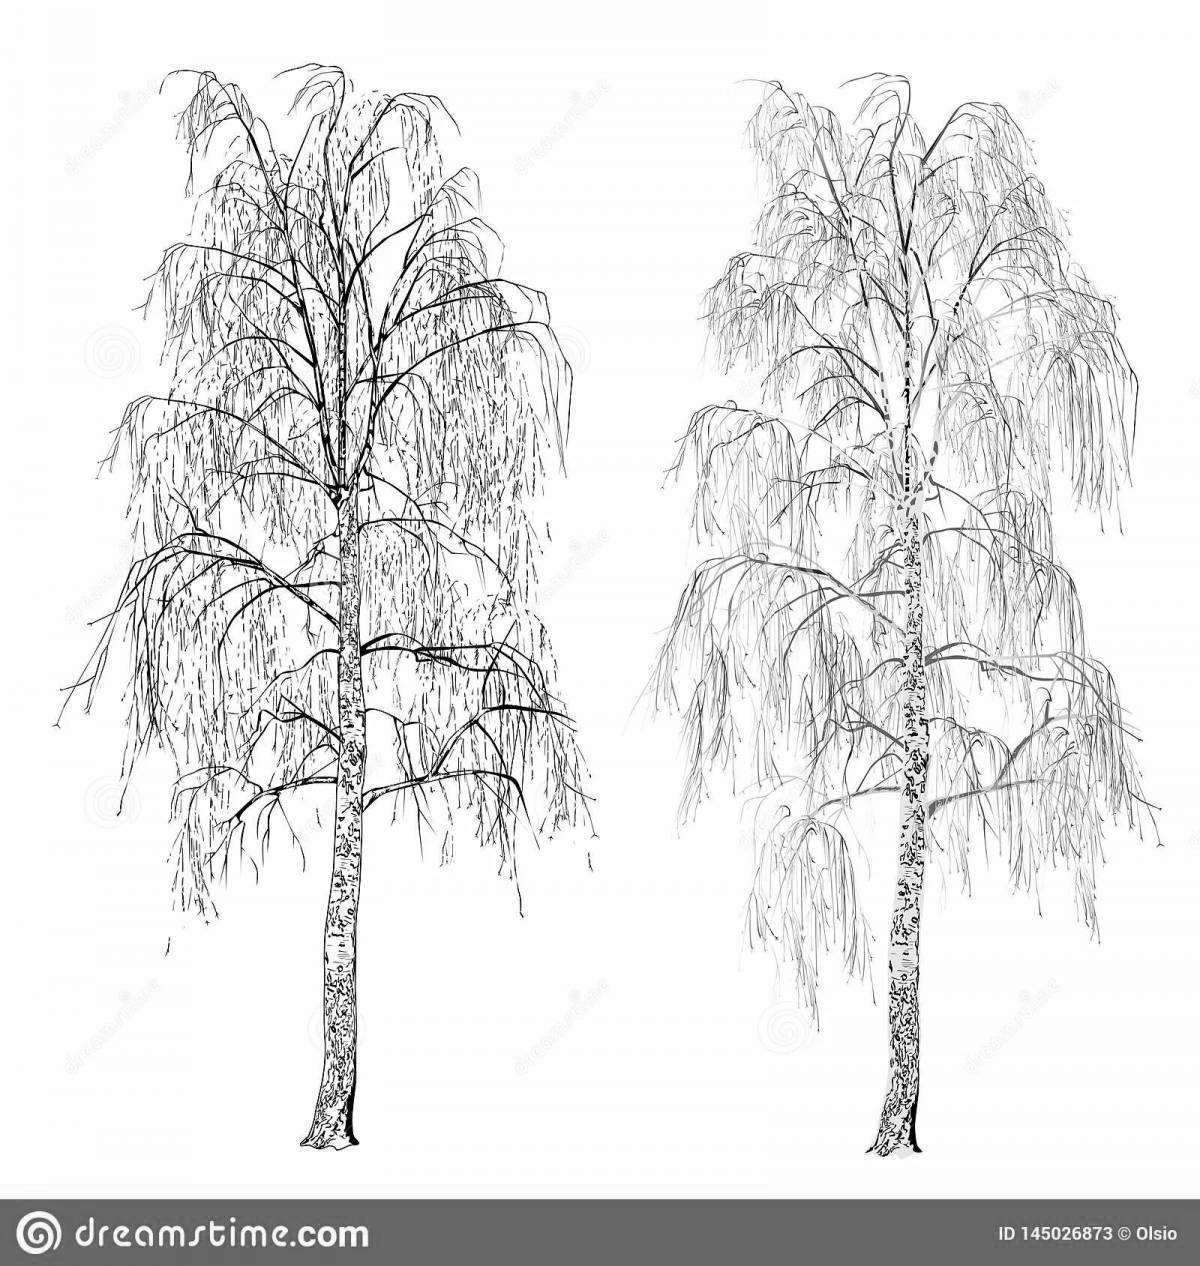 Charming birch tree coloring in winter for kids